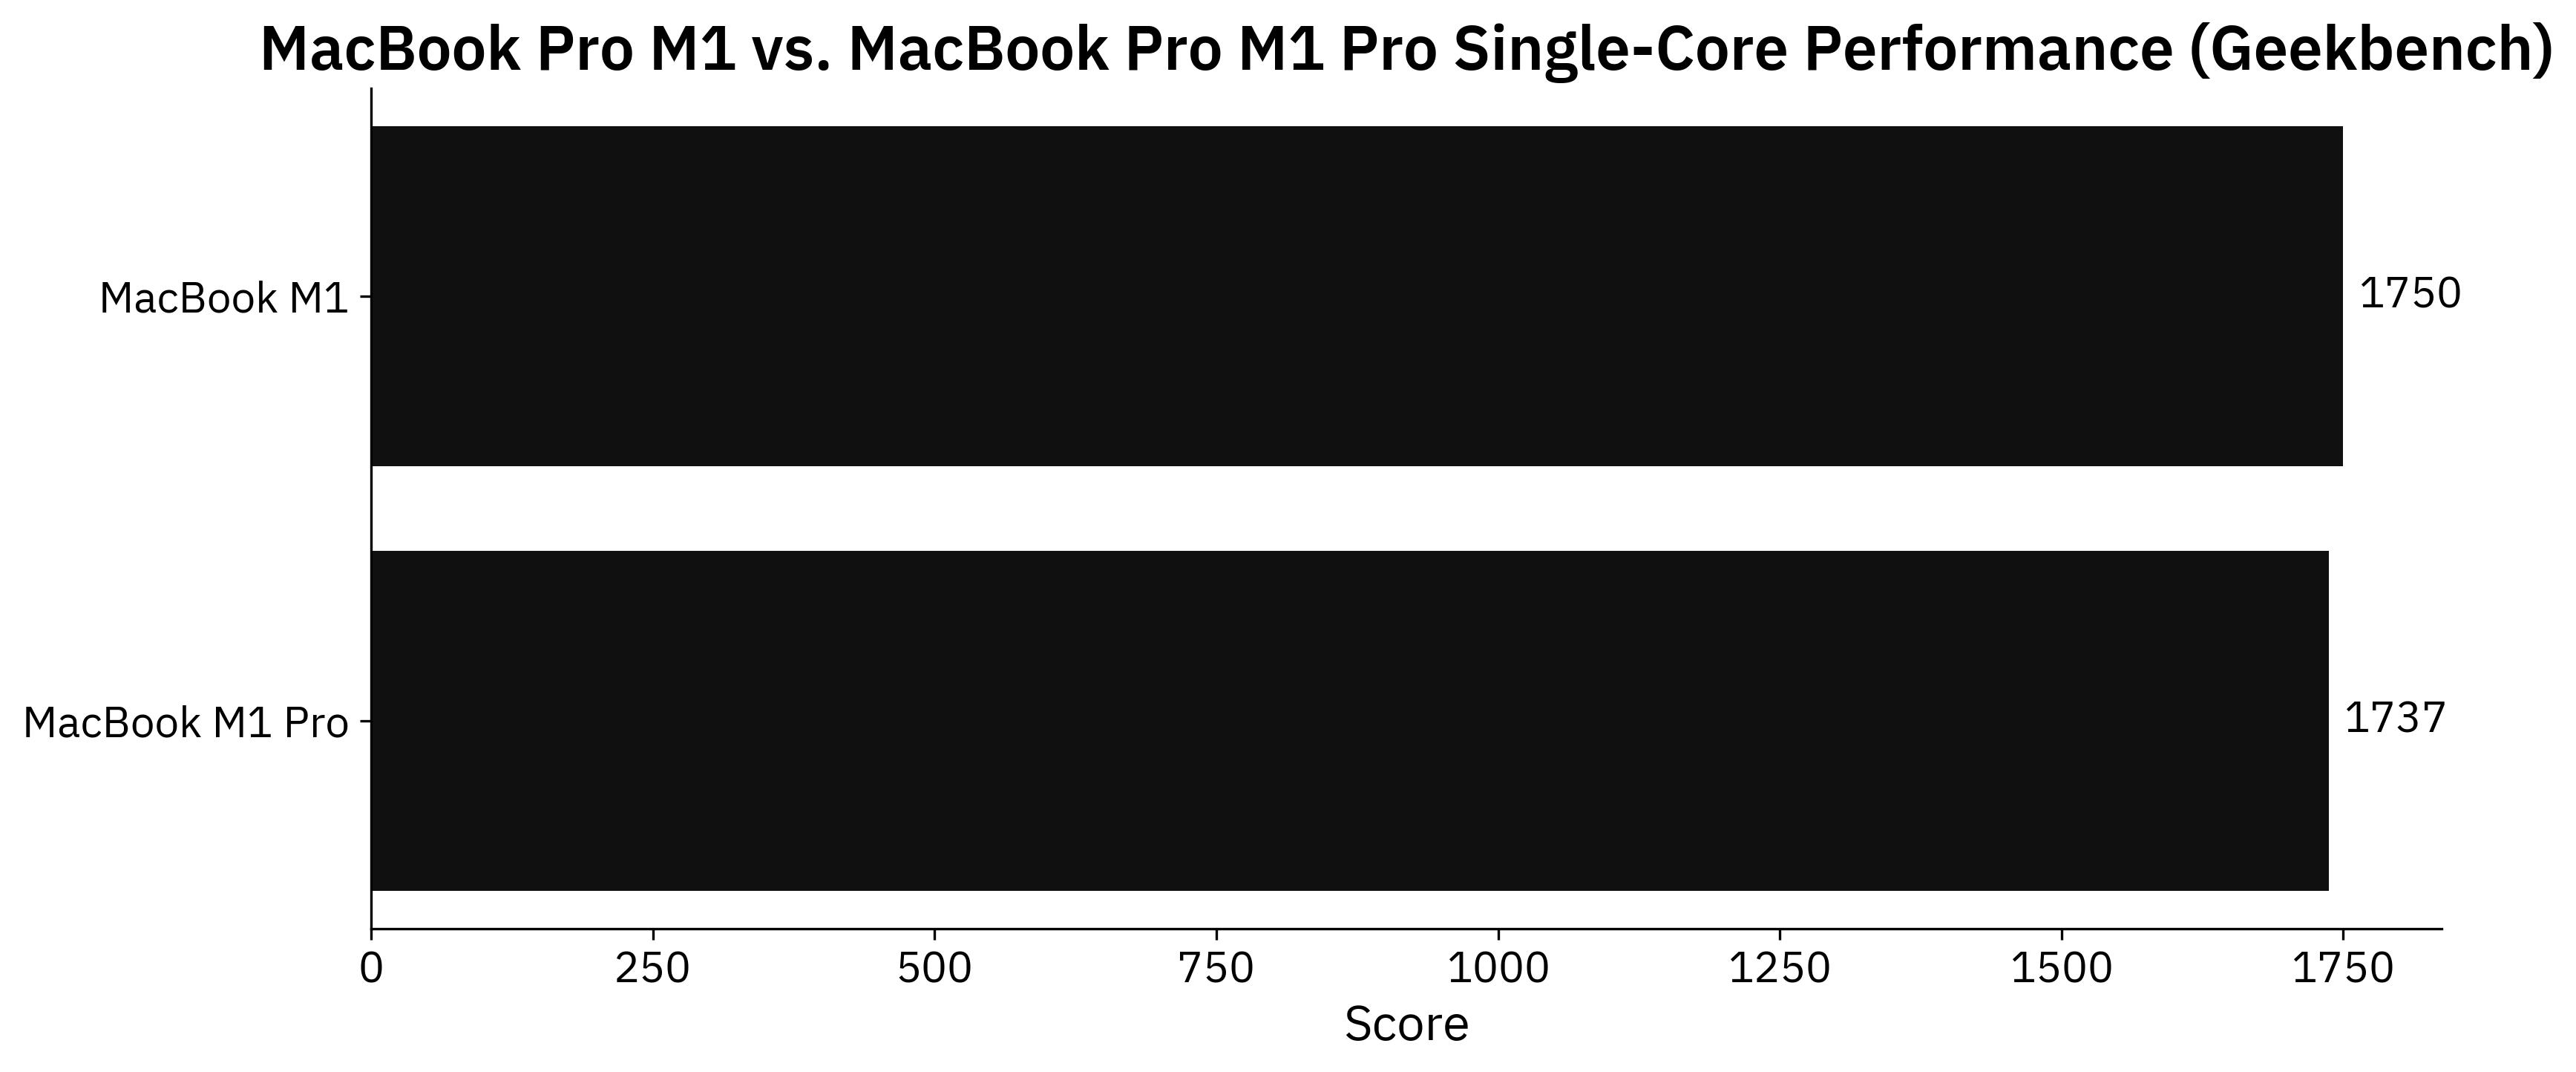 Image 2 - Geekbench single-core performance (image by author)